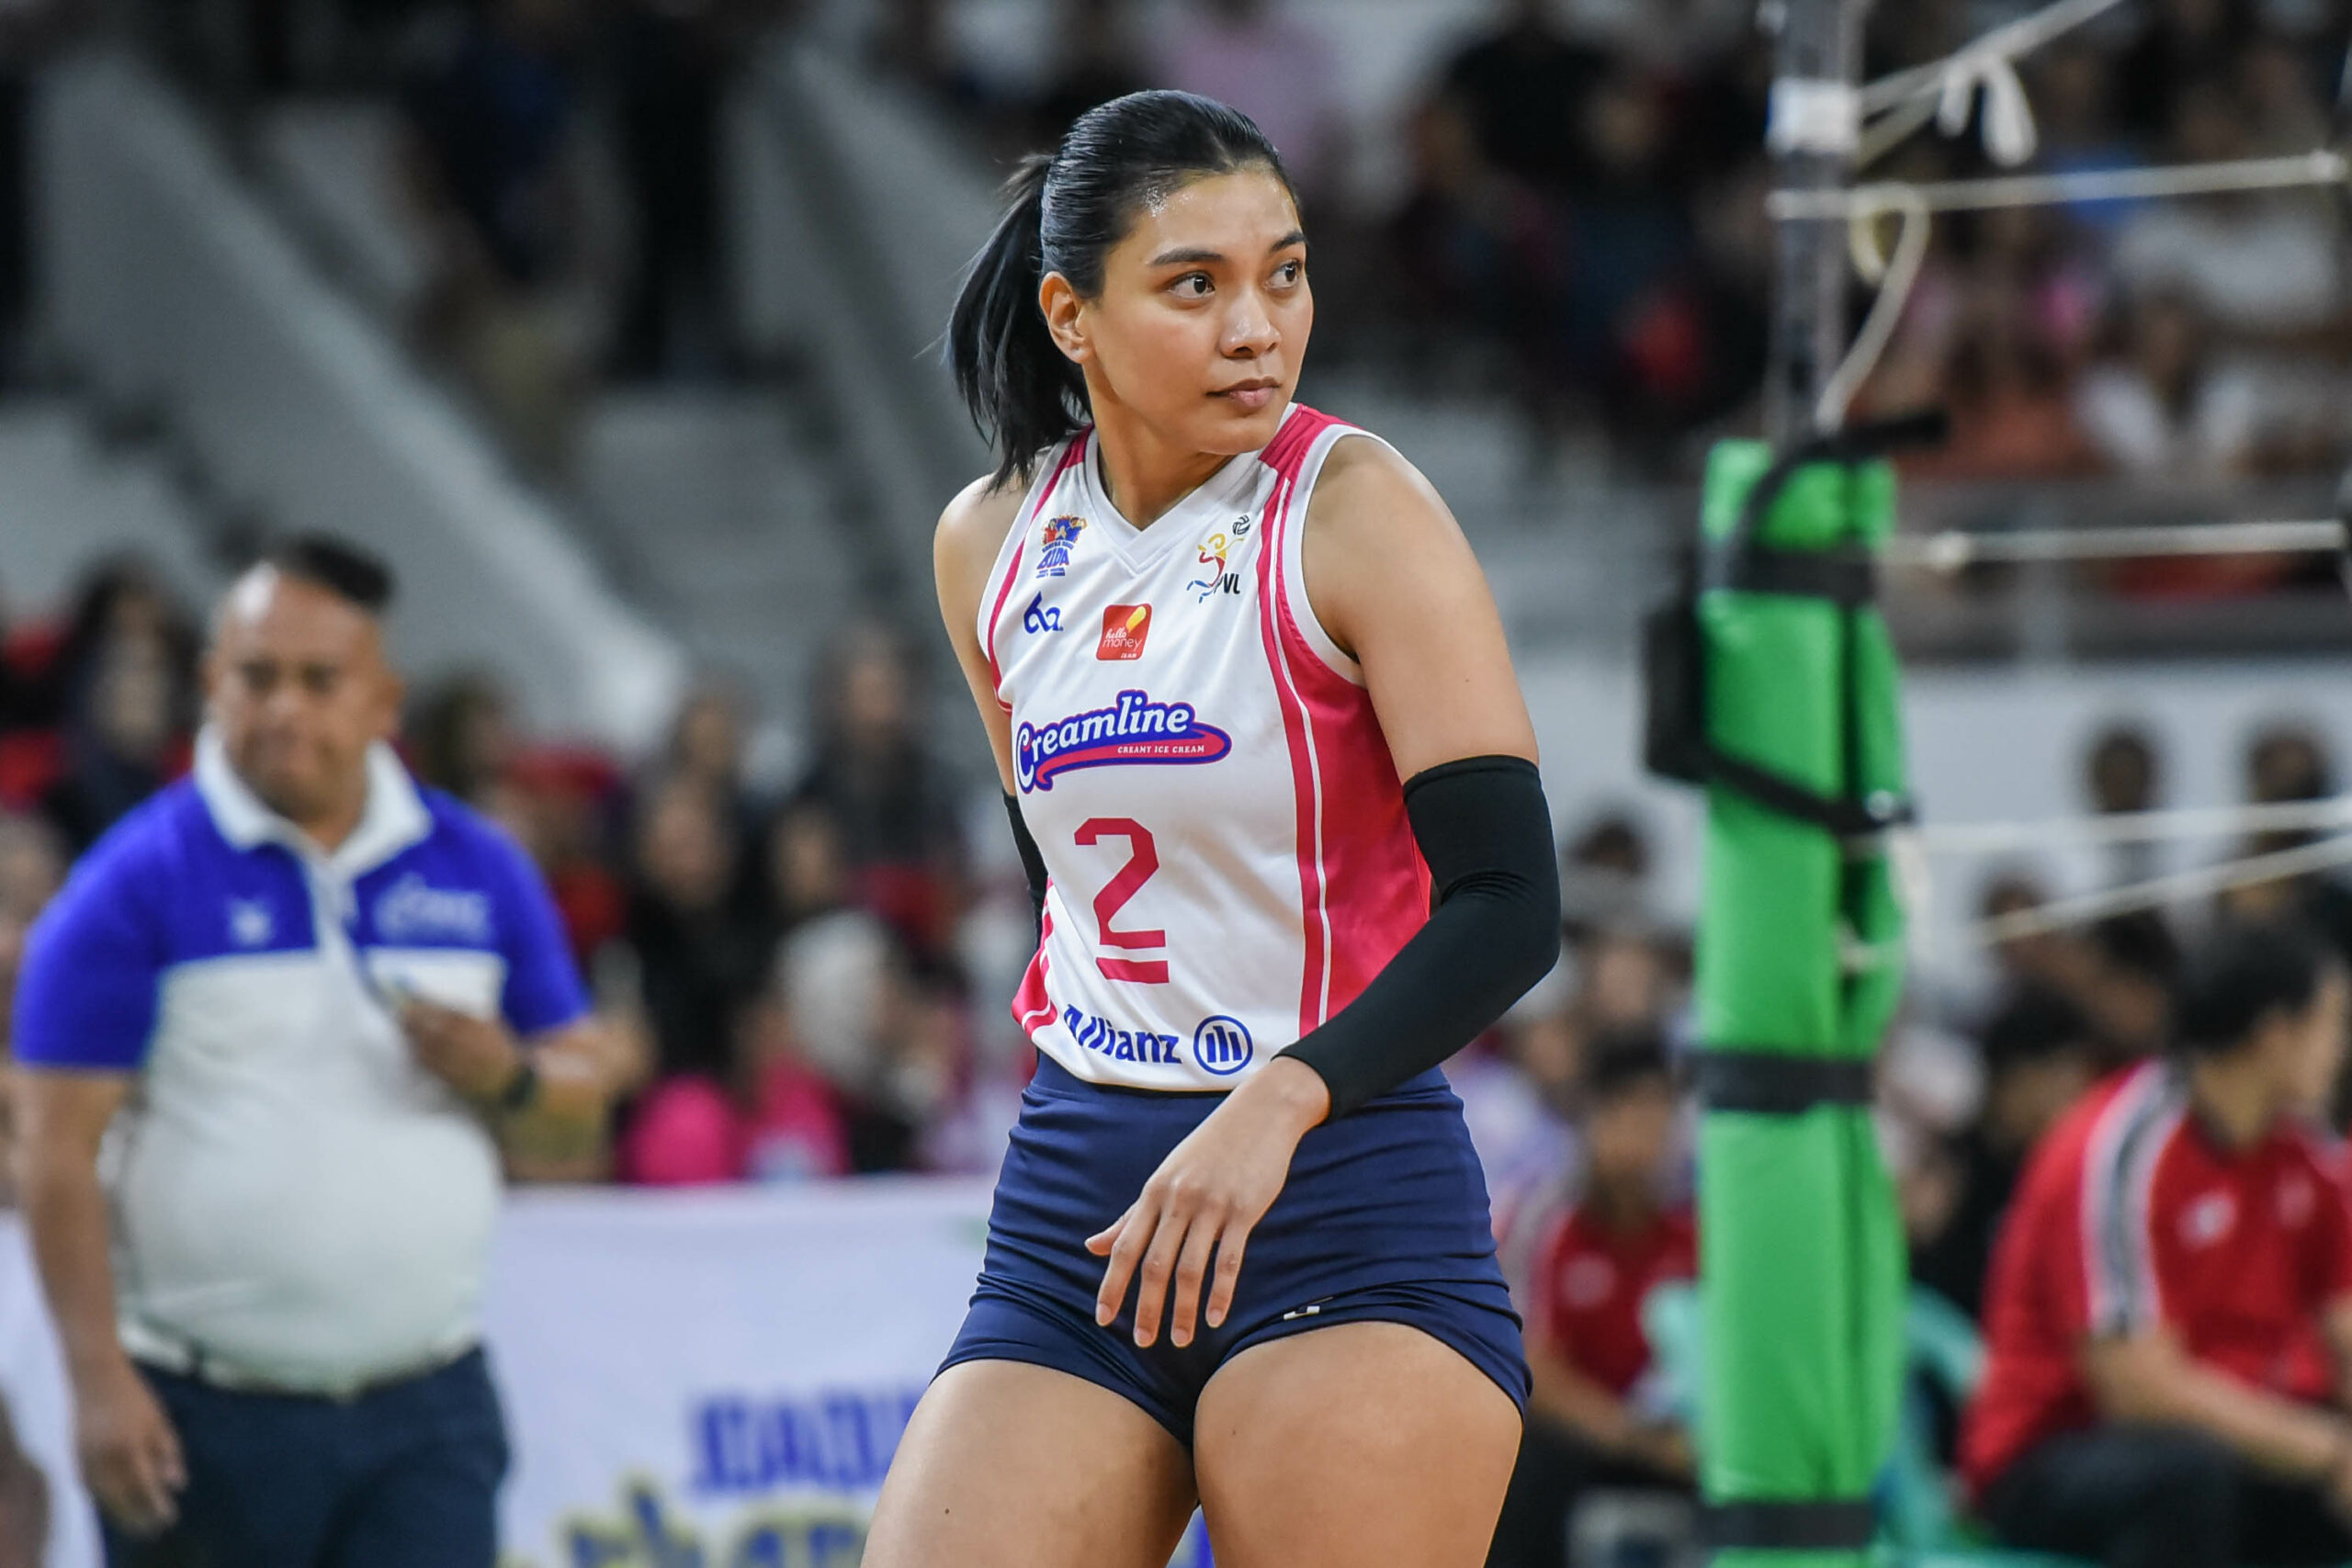 PVL-On-Tour-CDO-PLDT-vs.-Creamline-Alyssa-Valdez-4773-scaled Competing in packed venues continues to inspire Alyssa Valdez News PVL Volleyball  - philippine sports news